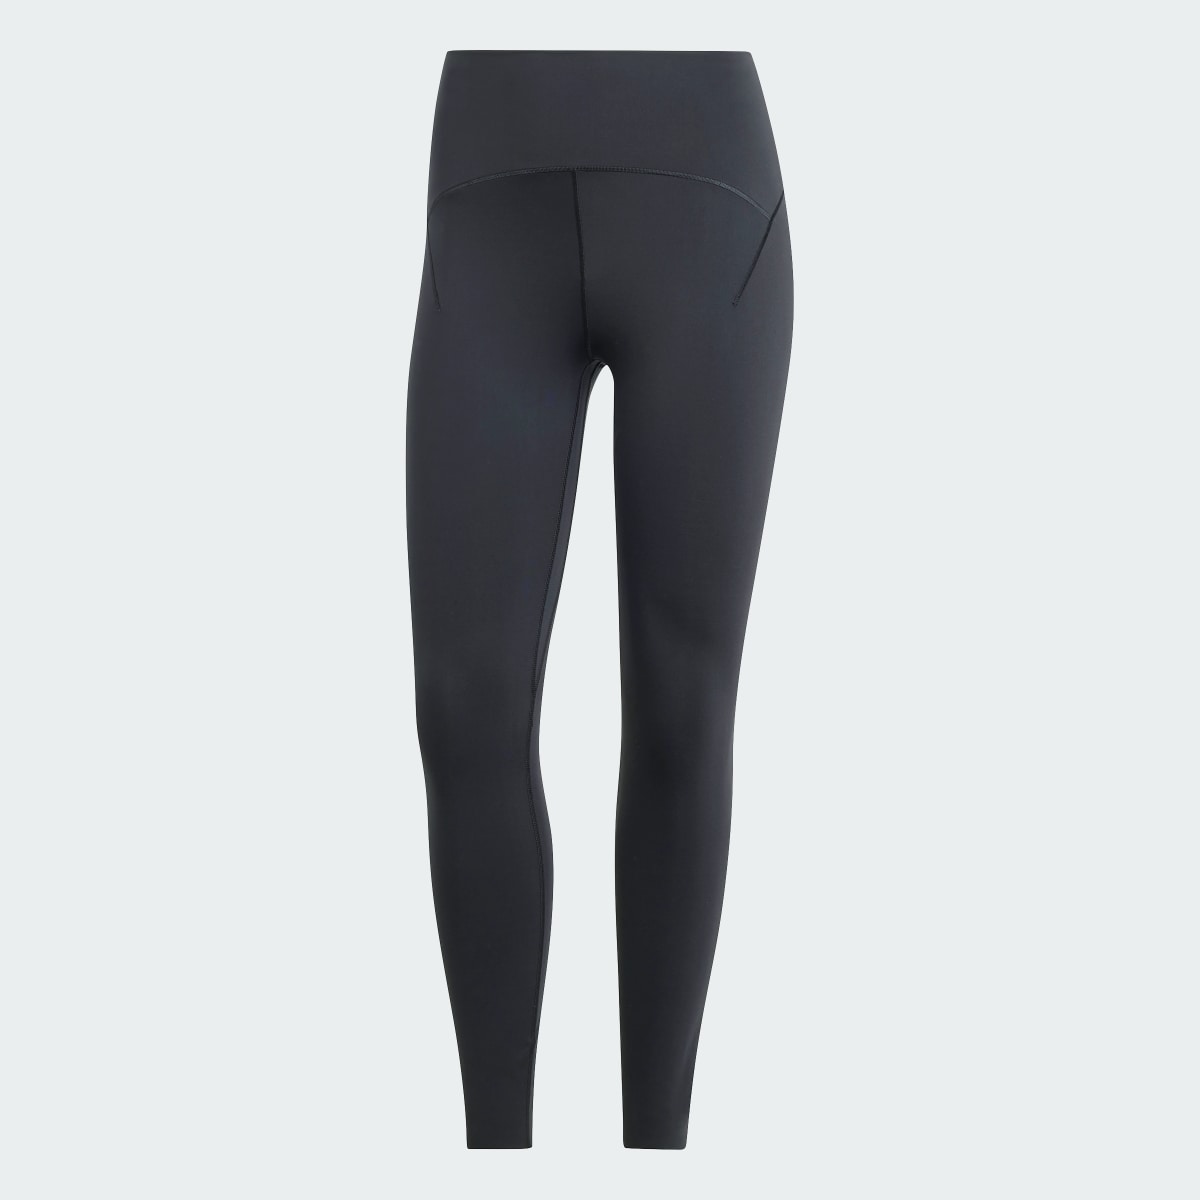 Adidas All Me Luxe 7/8 Leggings. 4